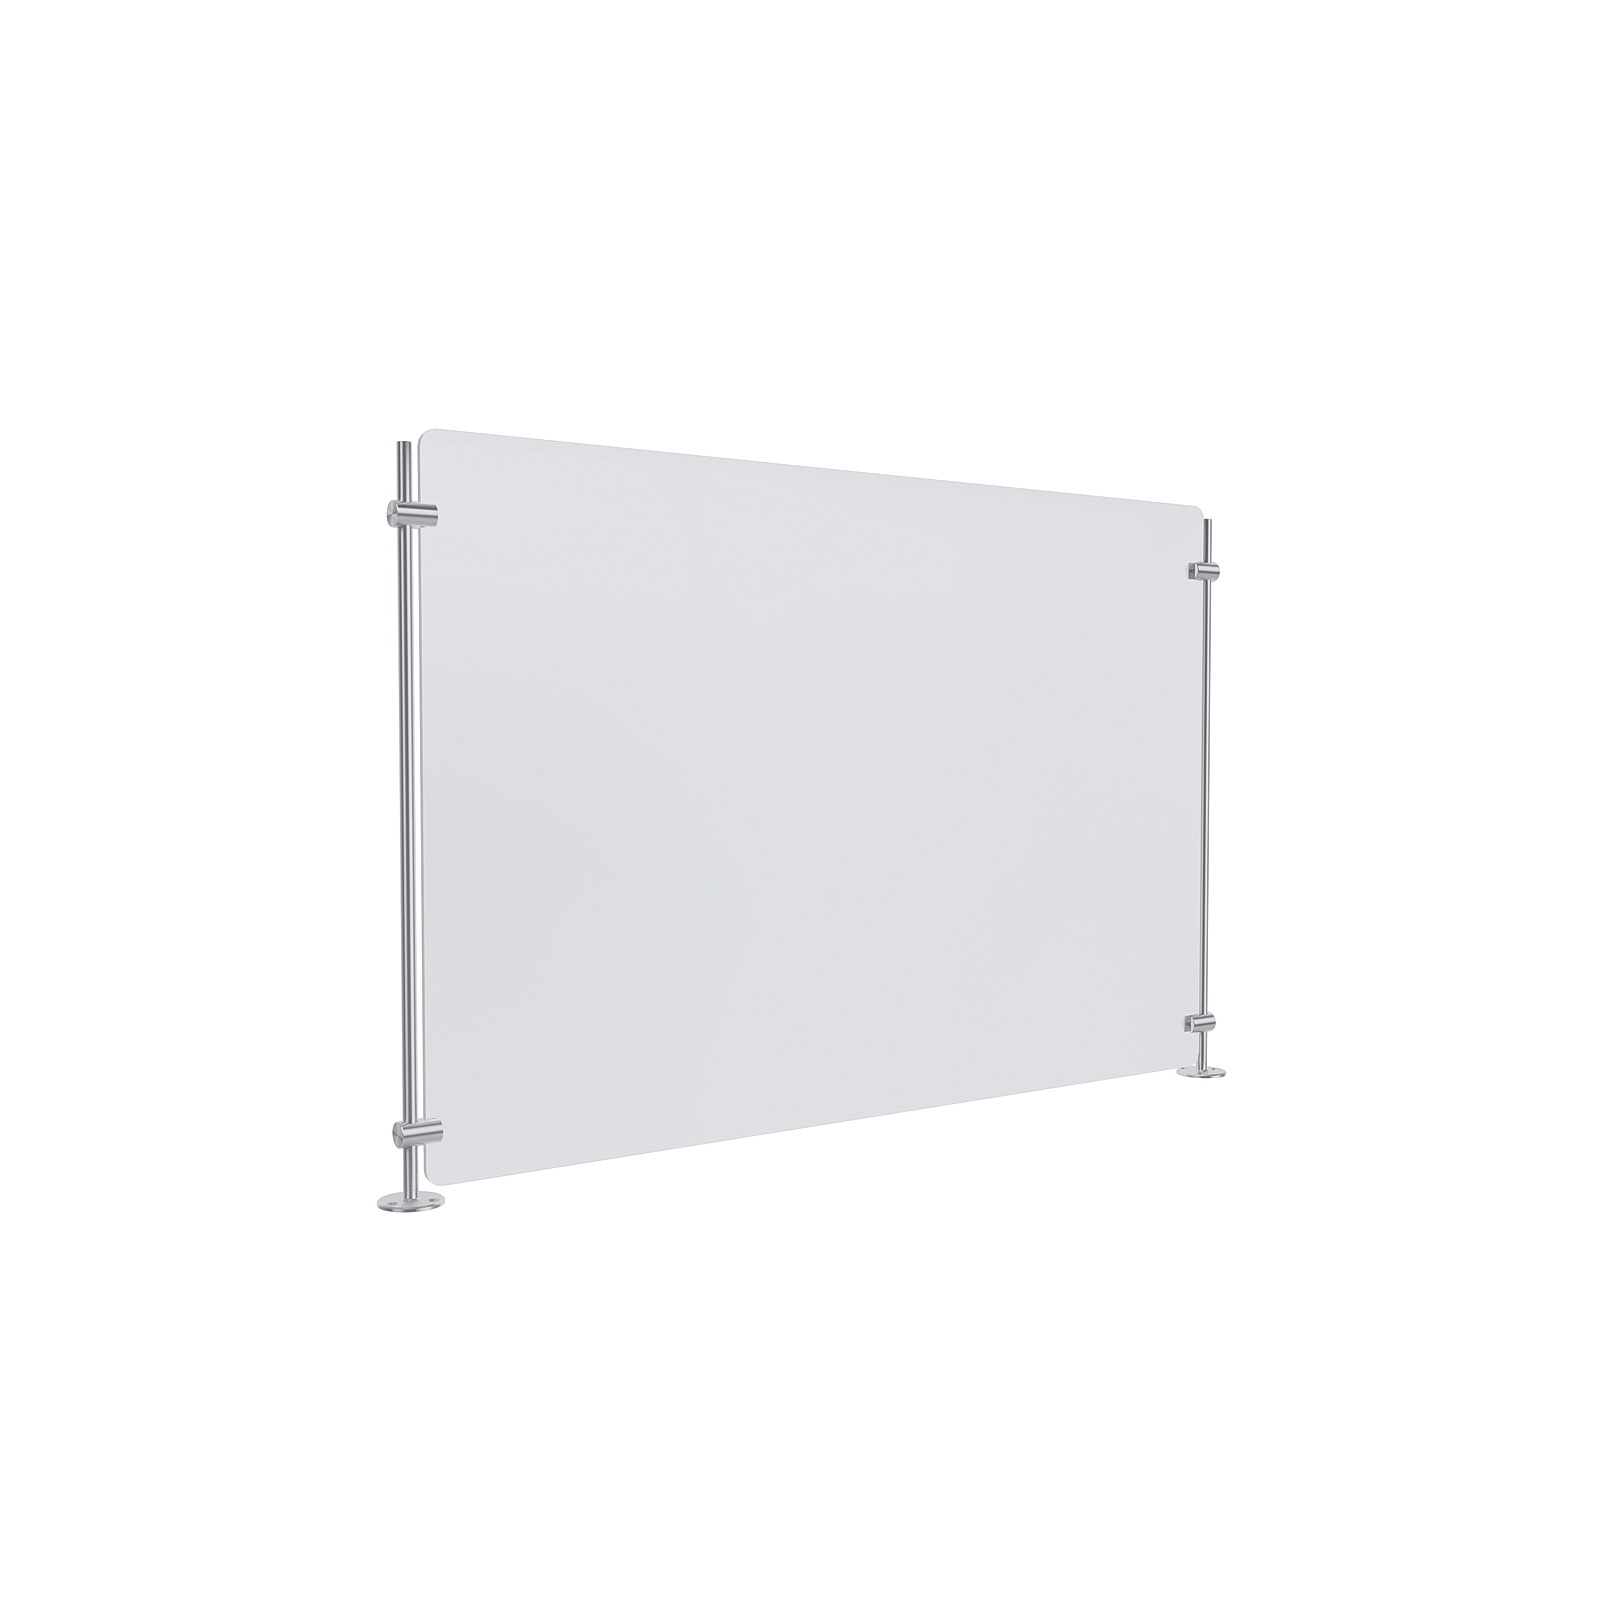 Clear Acrylic Sneeze Guard 30'' Wide x 20'' Tall, with (2) 20'' Tall x 3/8'' Diameter Clear Anodized Aluminum Rods on the Side.